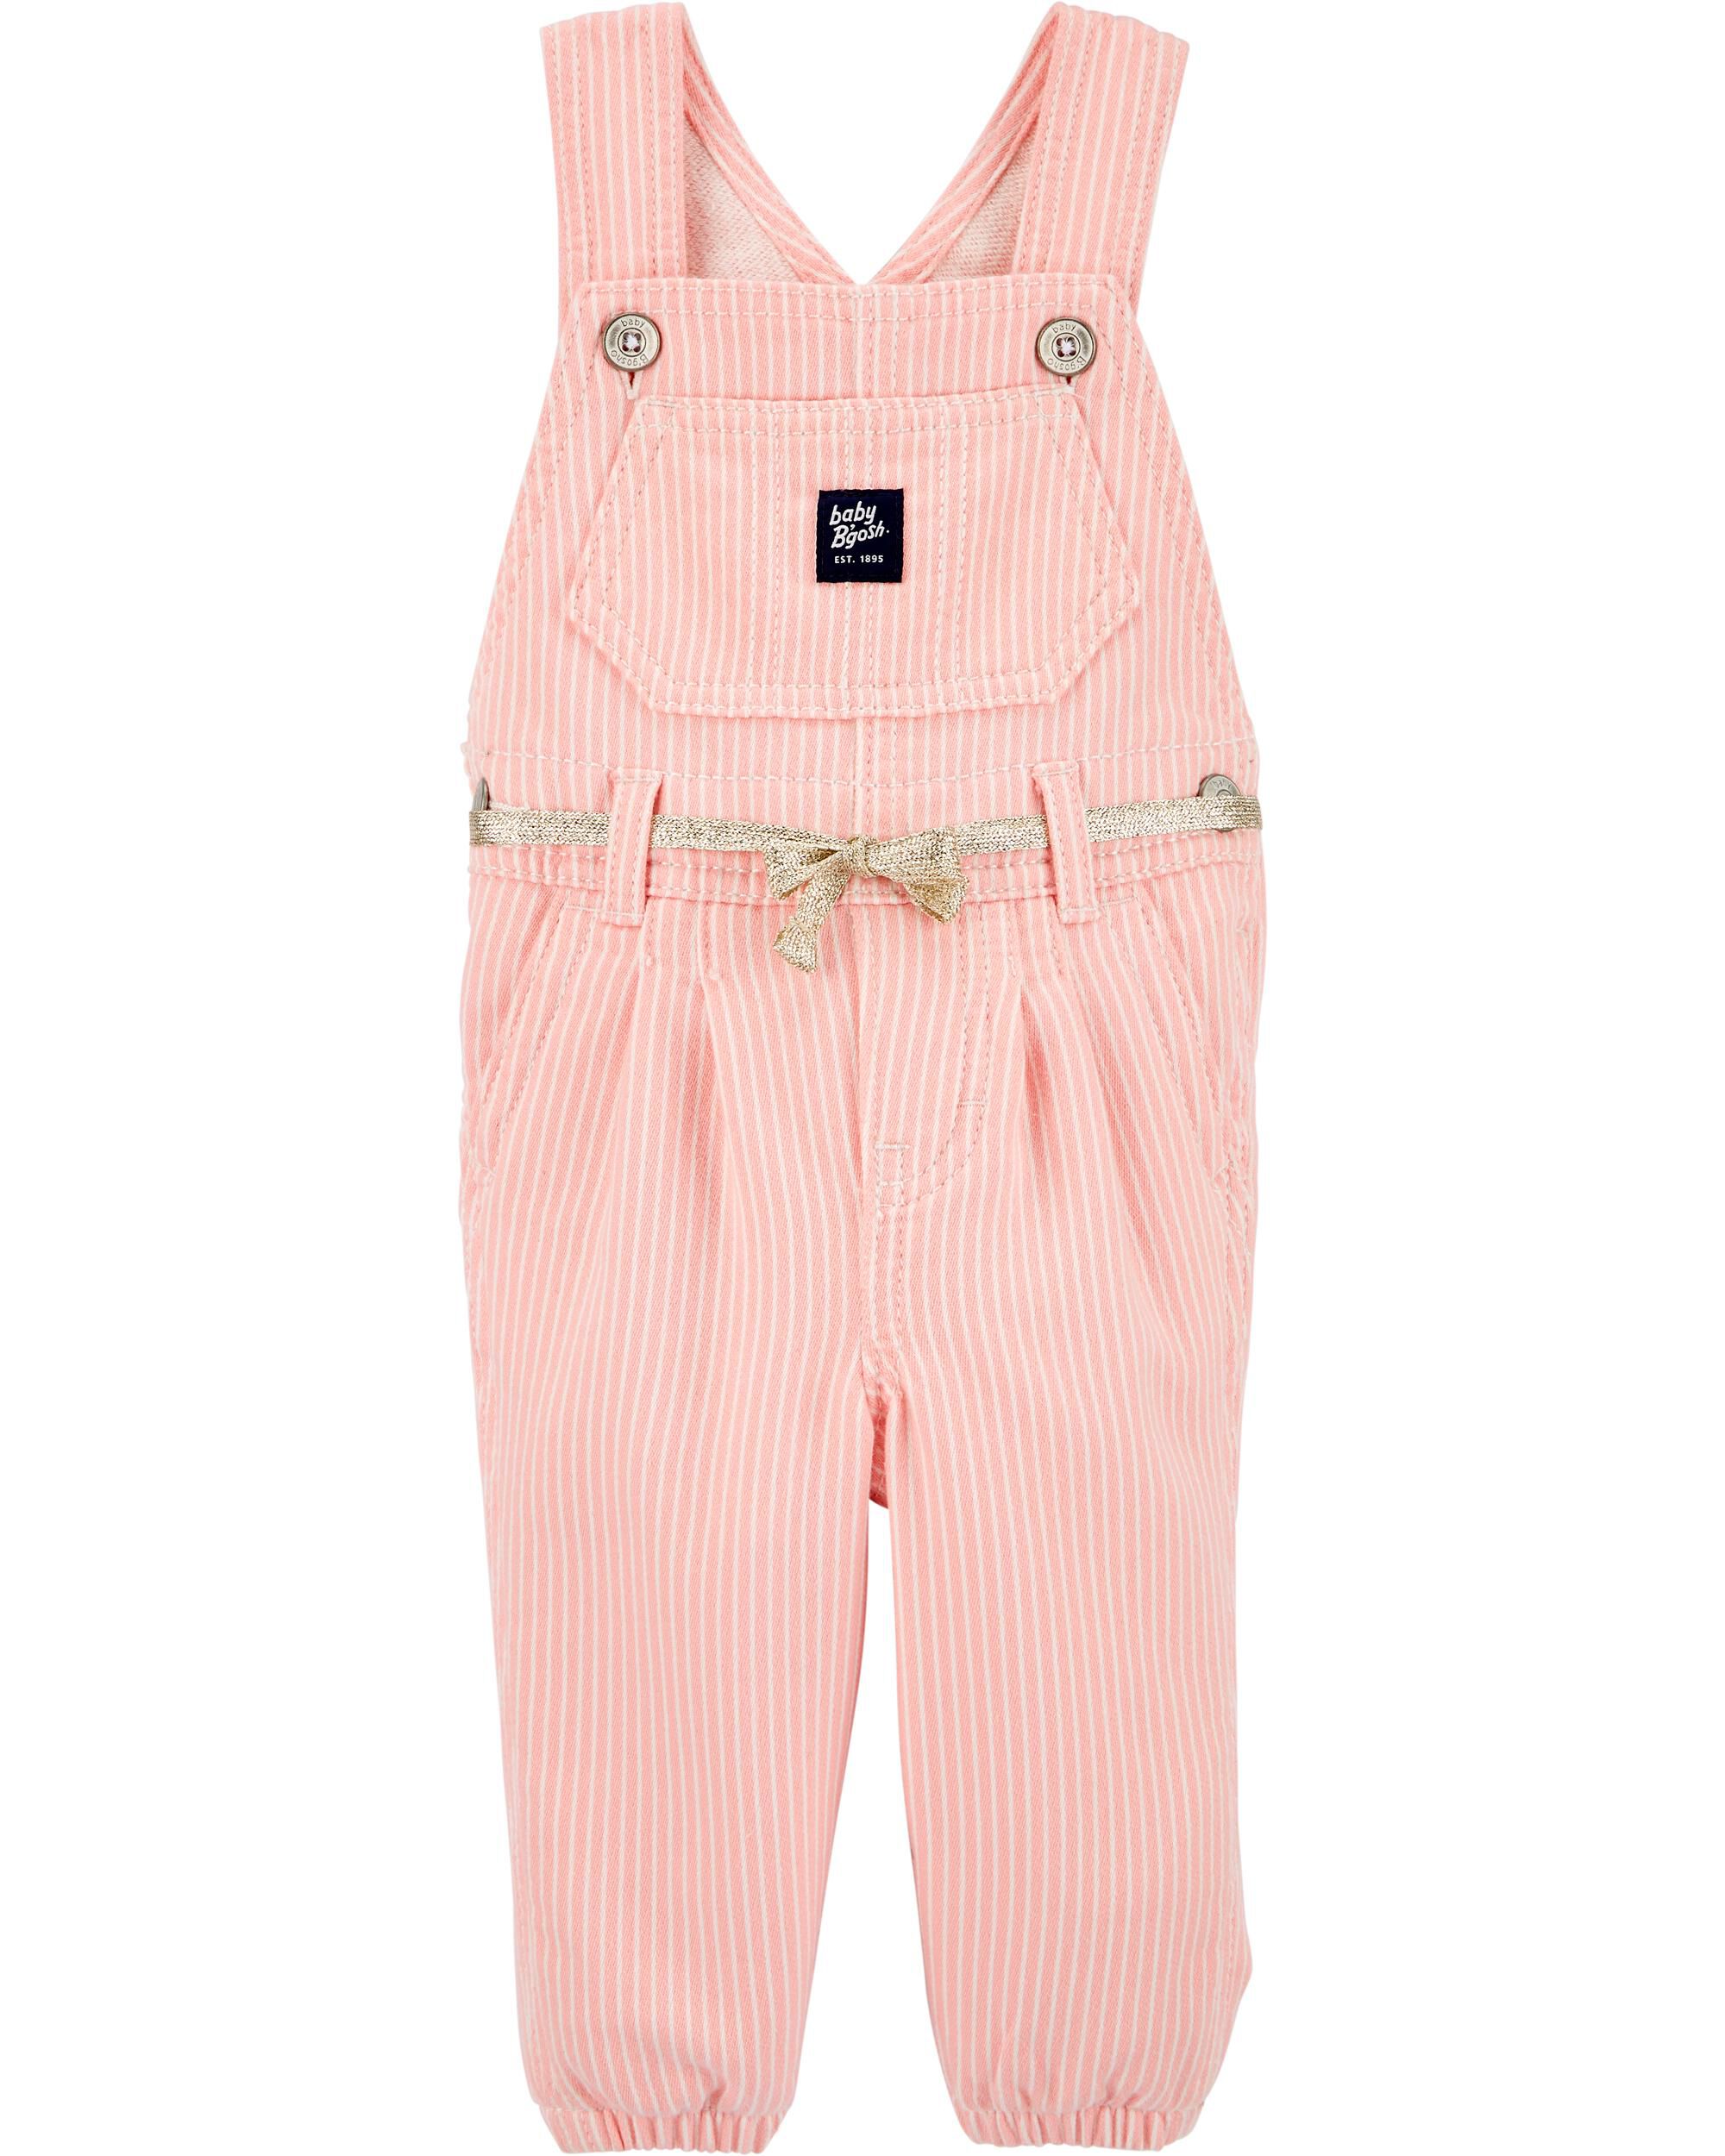 Carters Stretchy Hickory Stripe Overalls